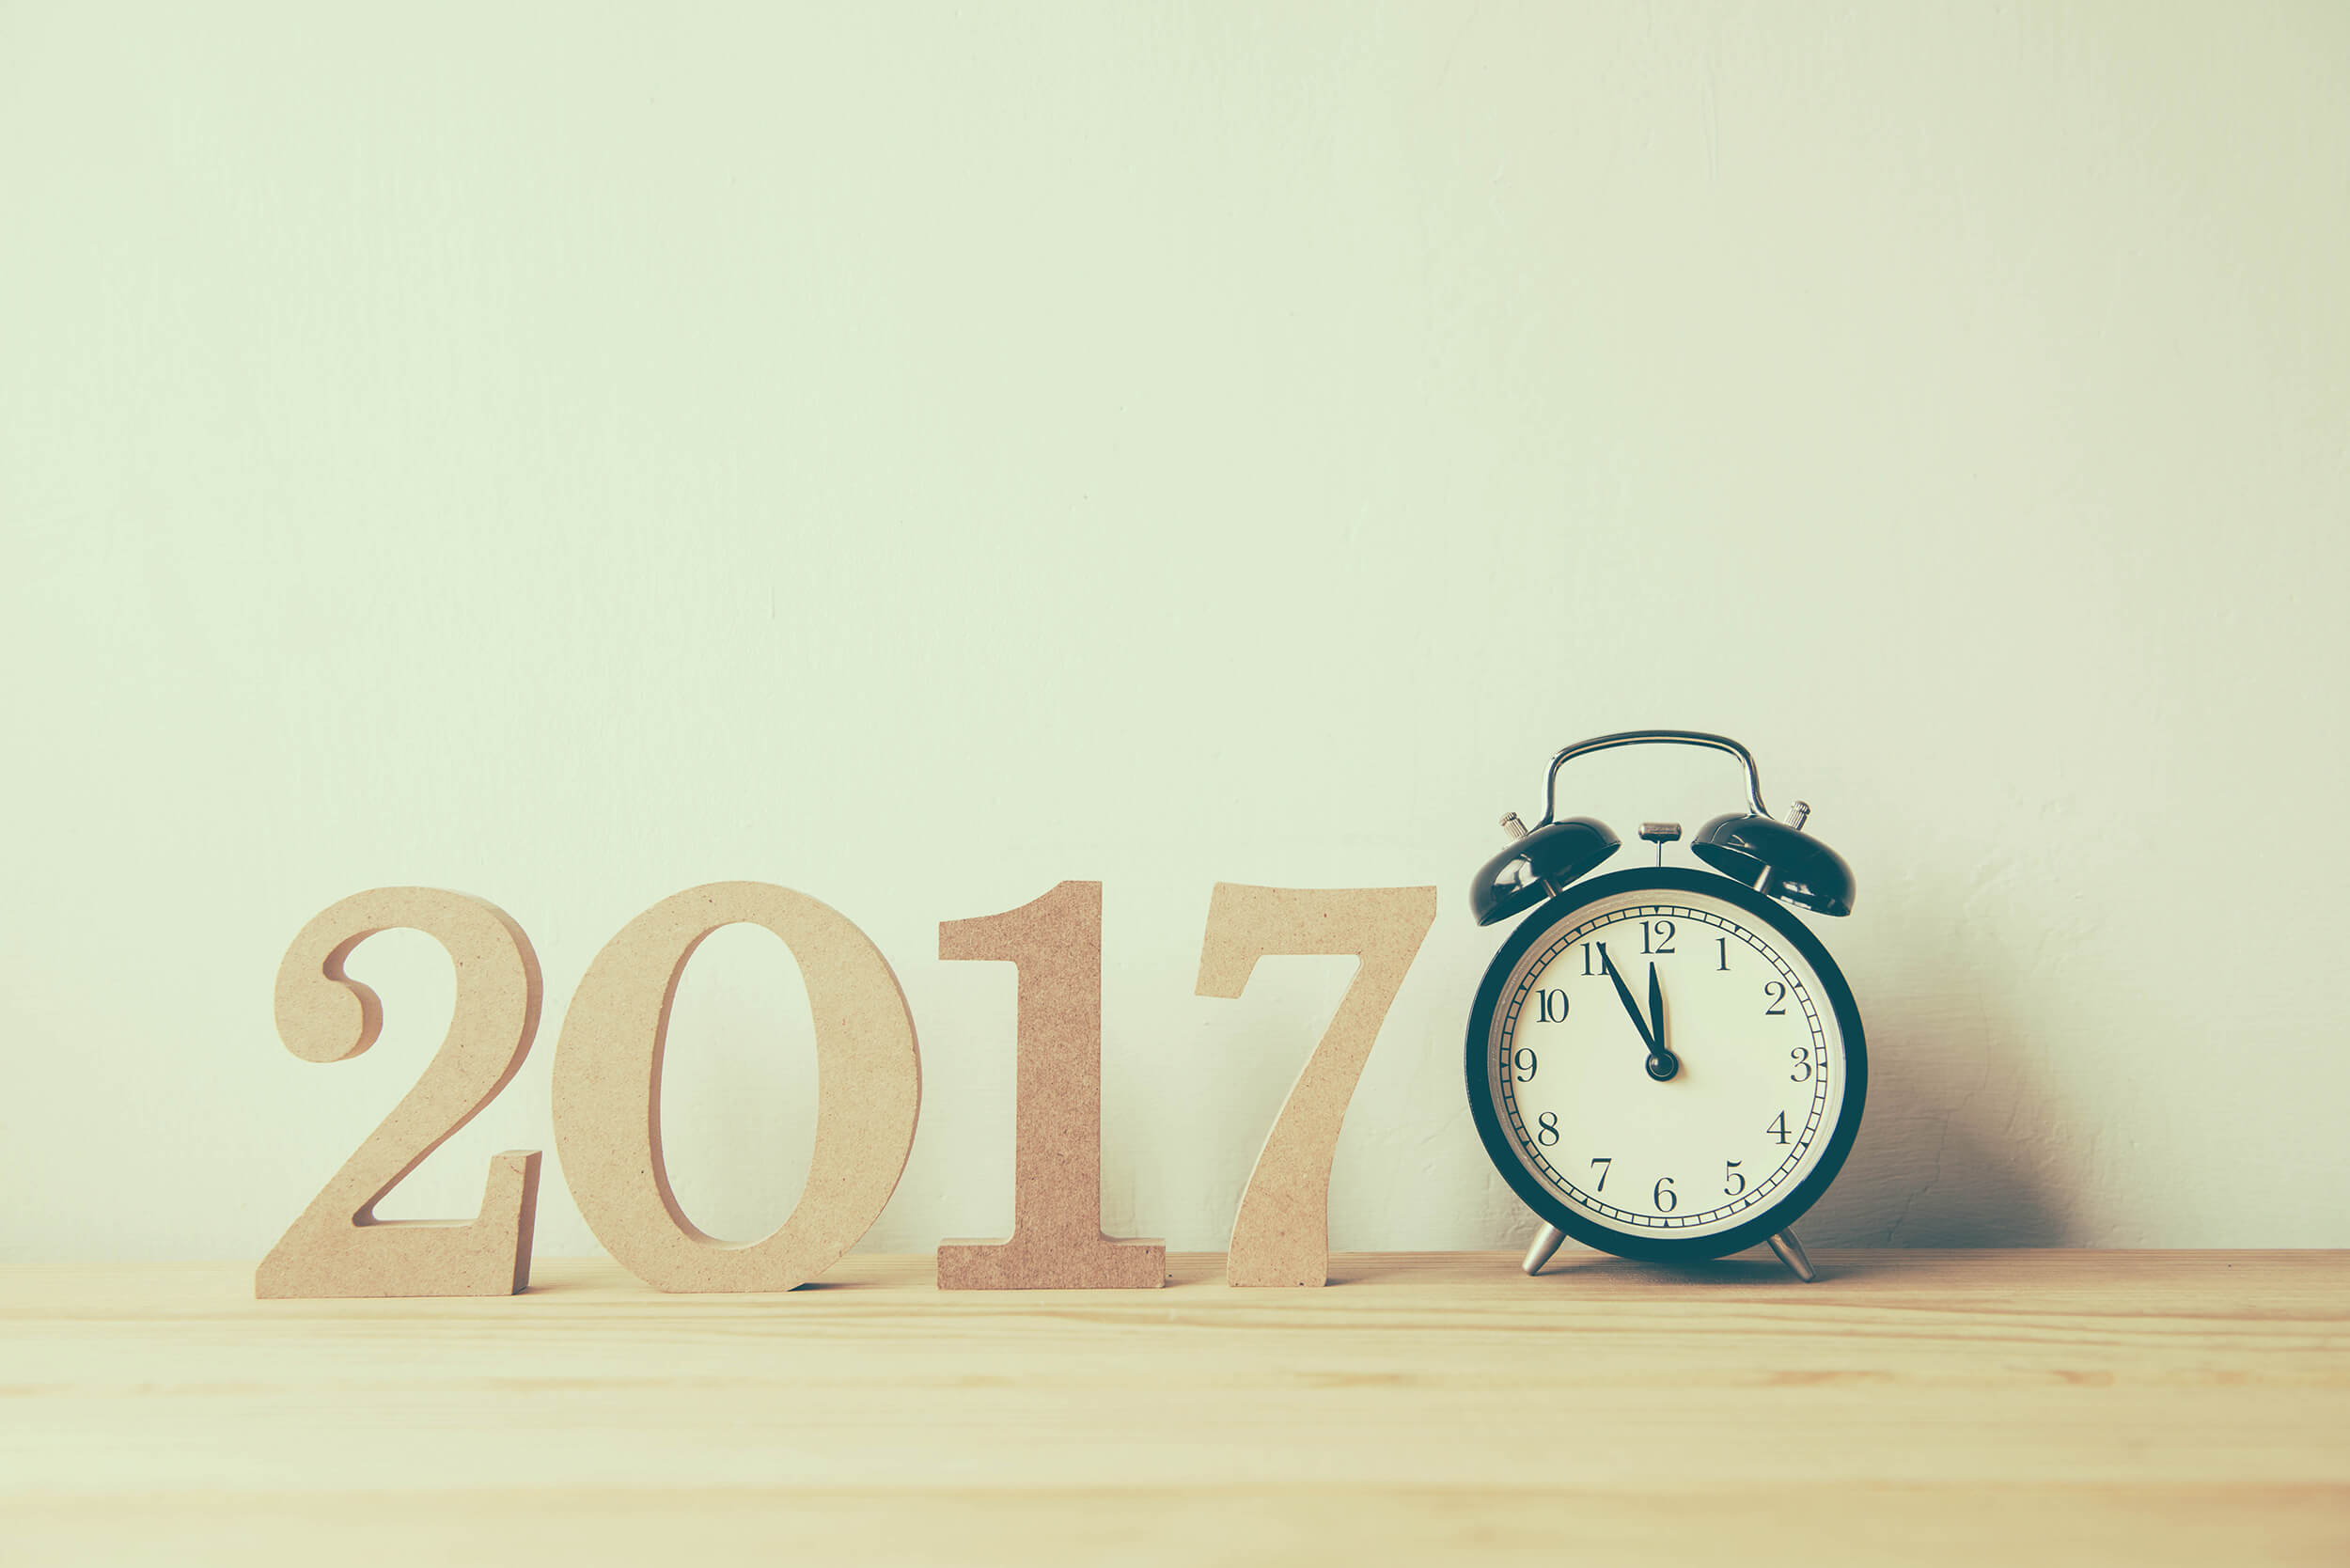 2017 new years resolutions